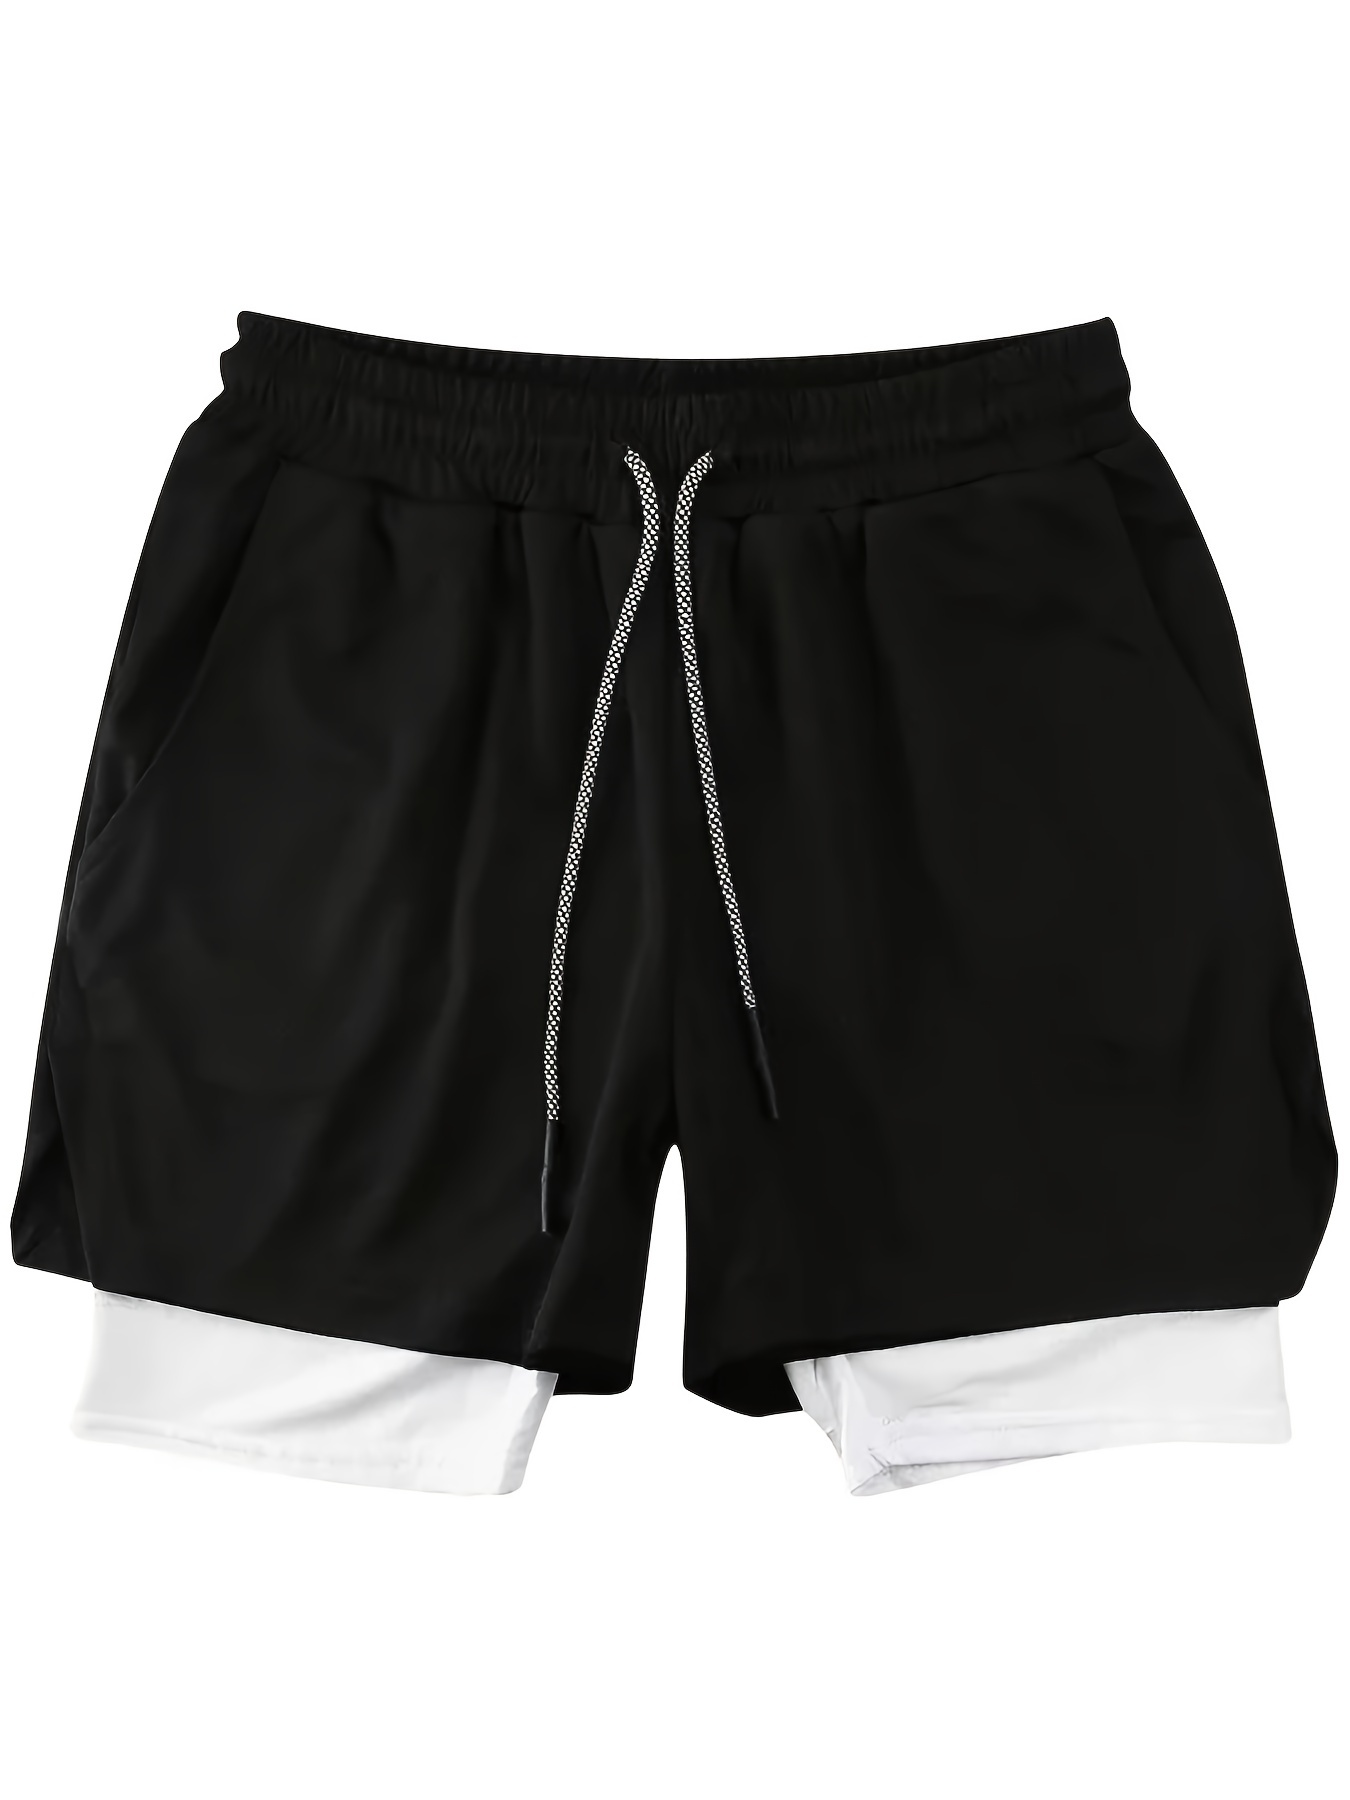 NEVER QUIT Double Layer 2 in 1 Sports Shorts with Inner Tights for